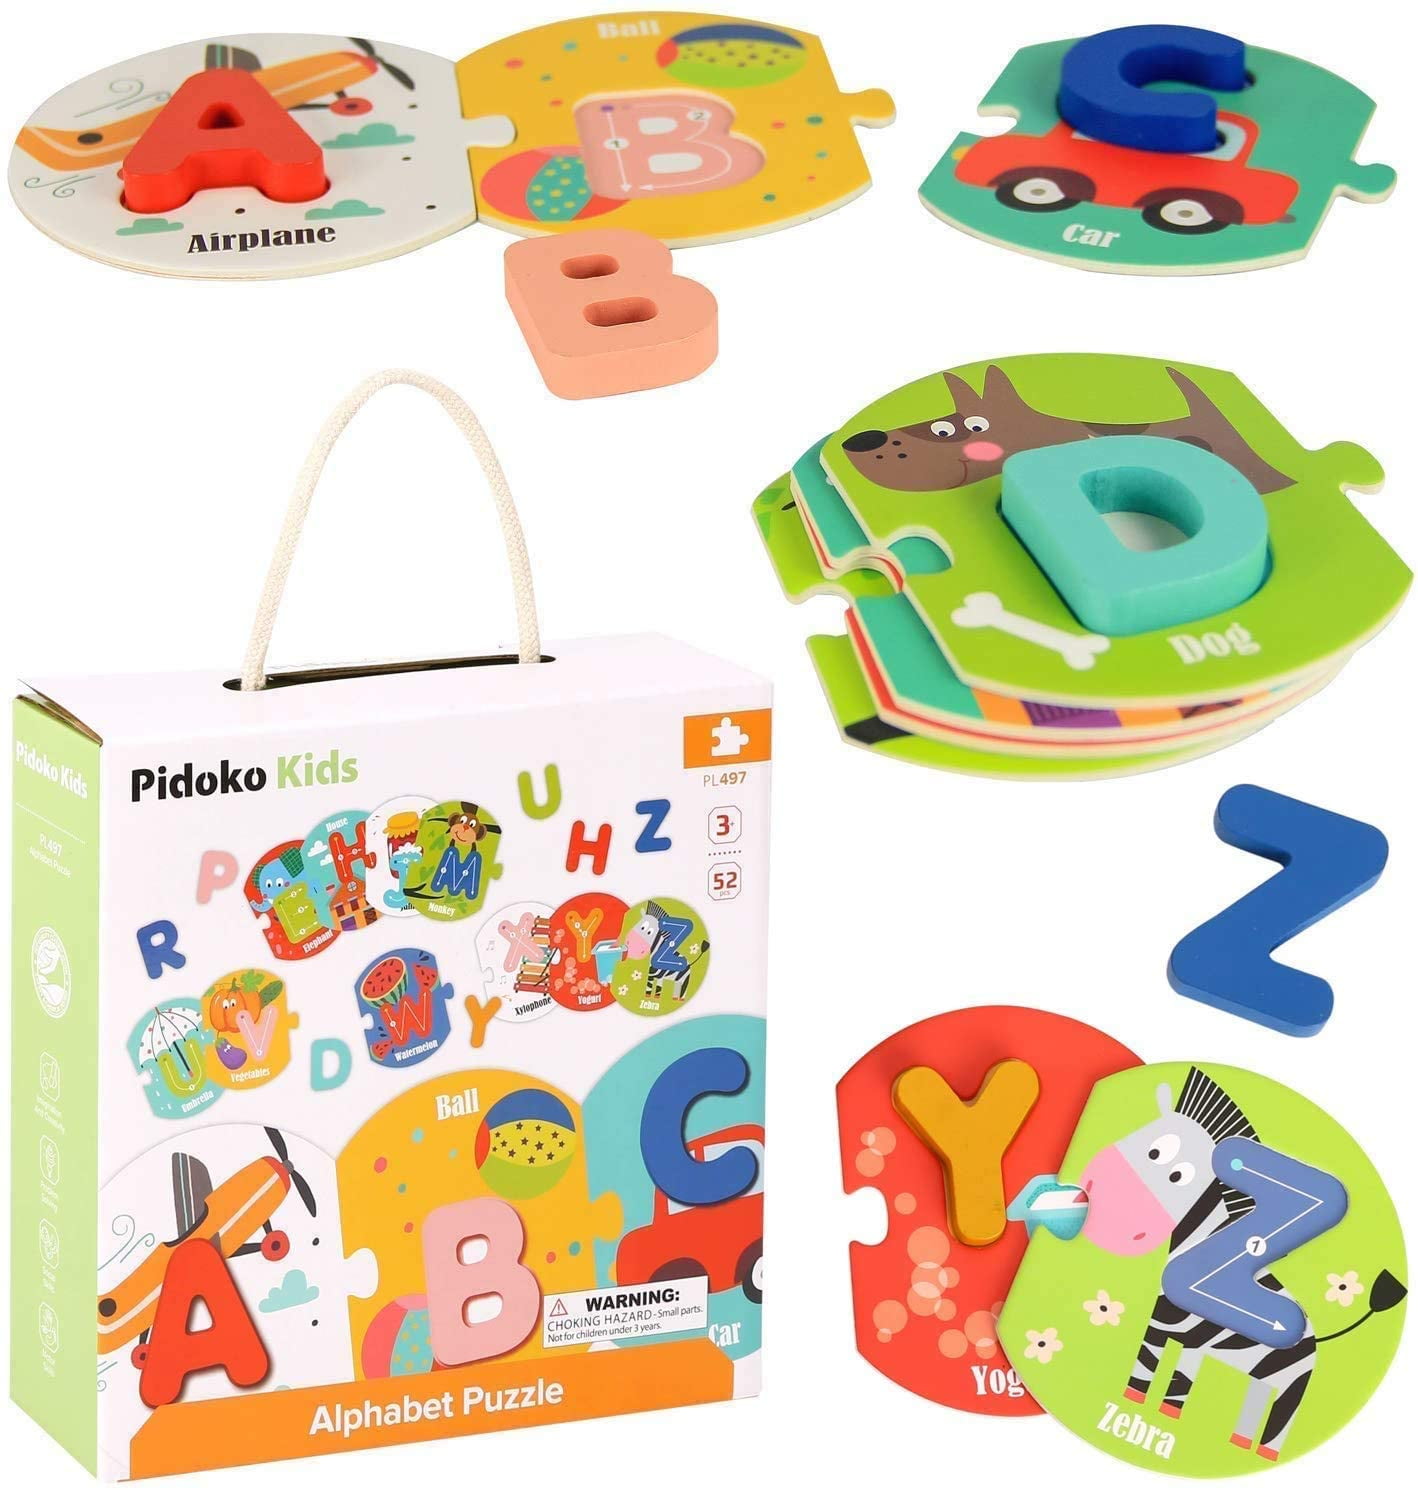 Details about   LEAPFROG NEW Tad's Fridge Phonics Teaches LETTERS and PHONICS 3 DAYS DELIVERY 